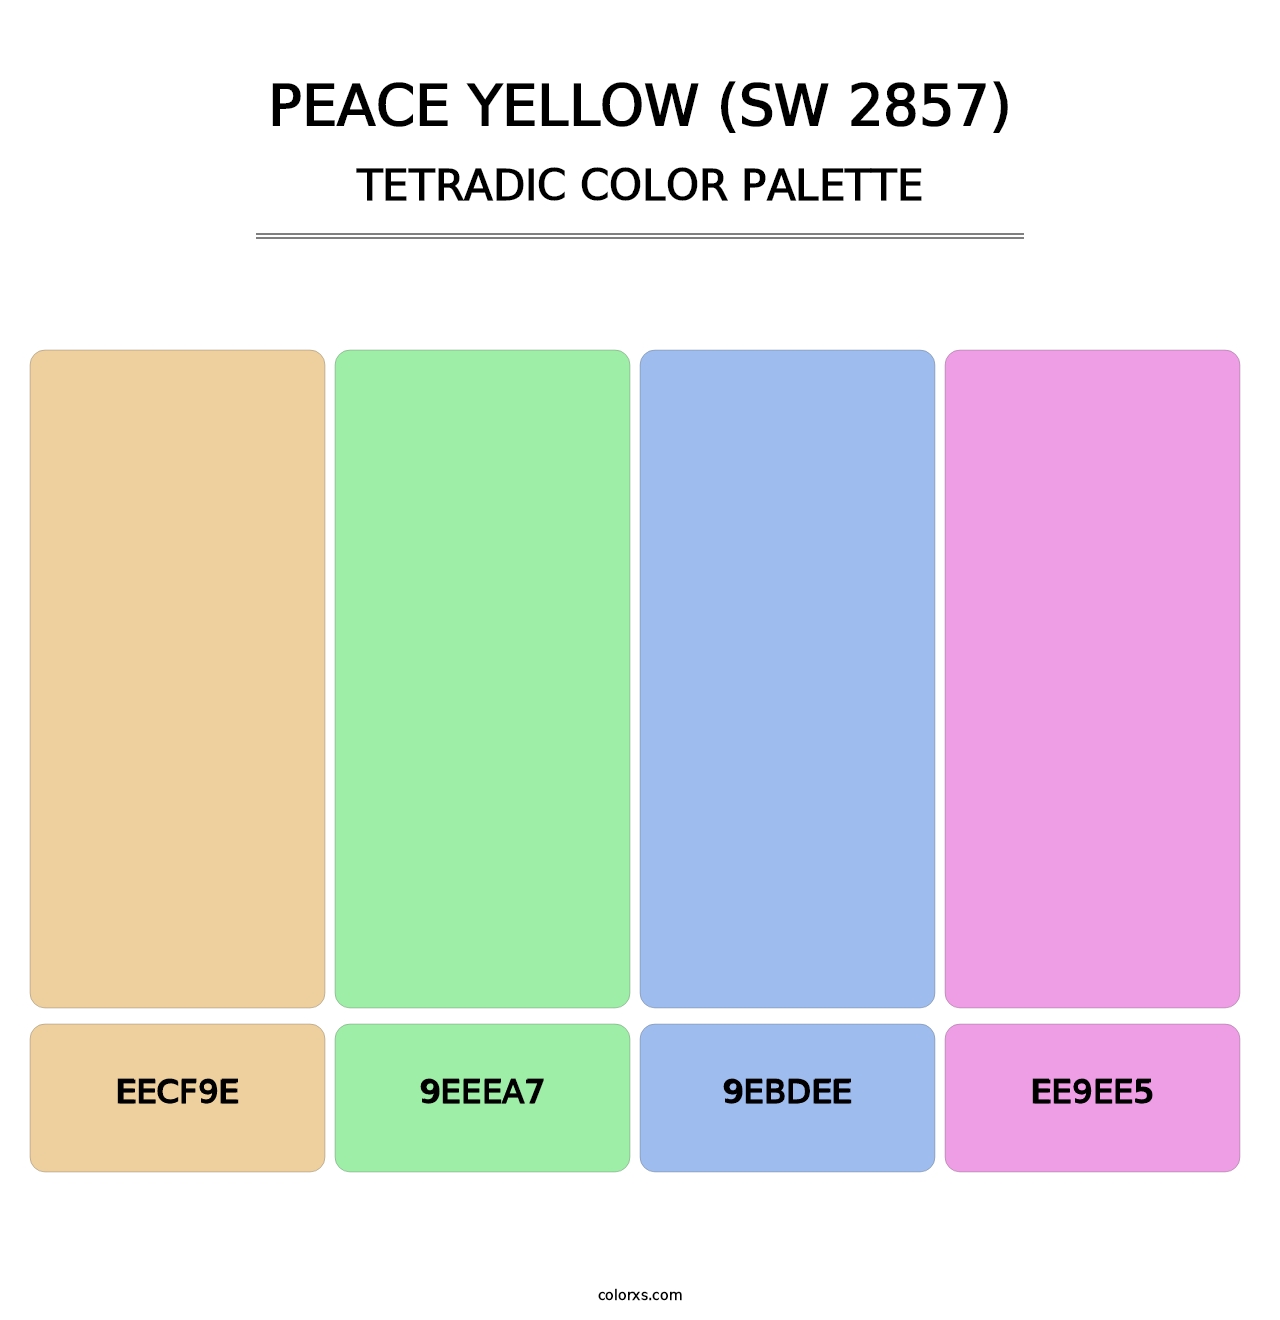 Peace Yellow (SW 2857) - Tetradic Color Palette